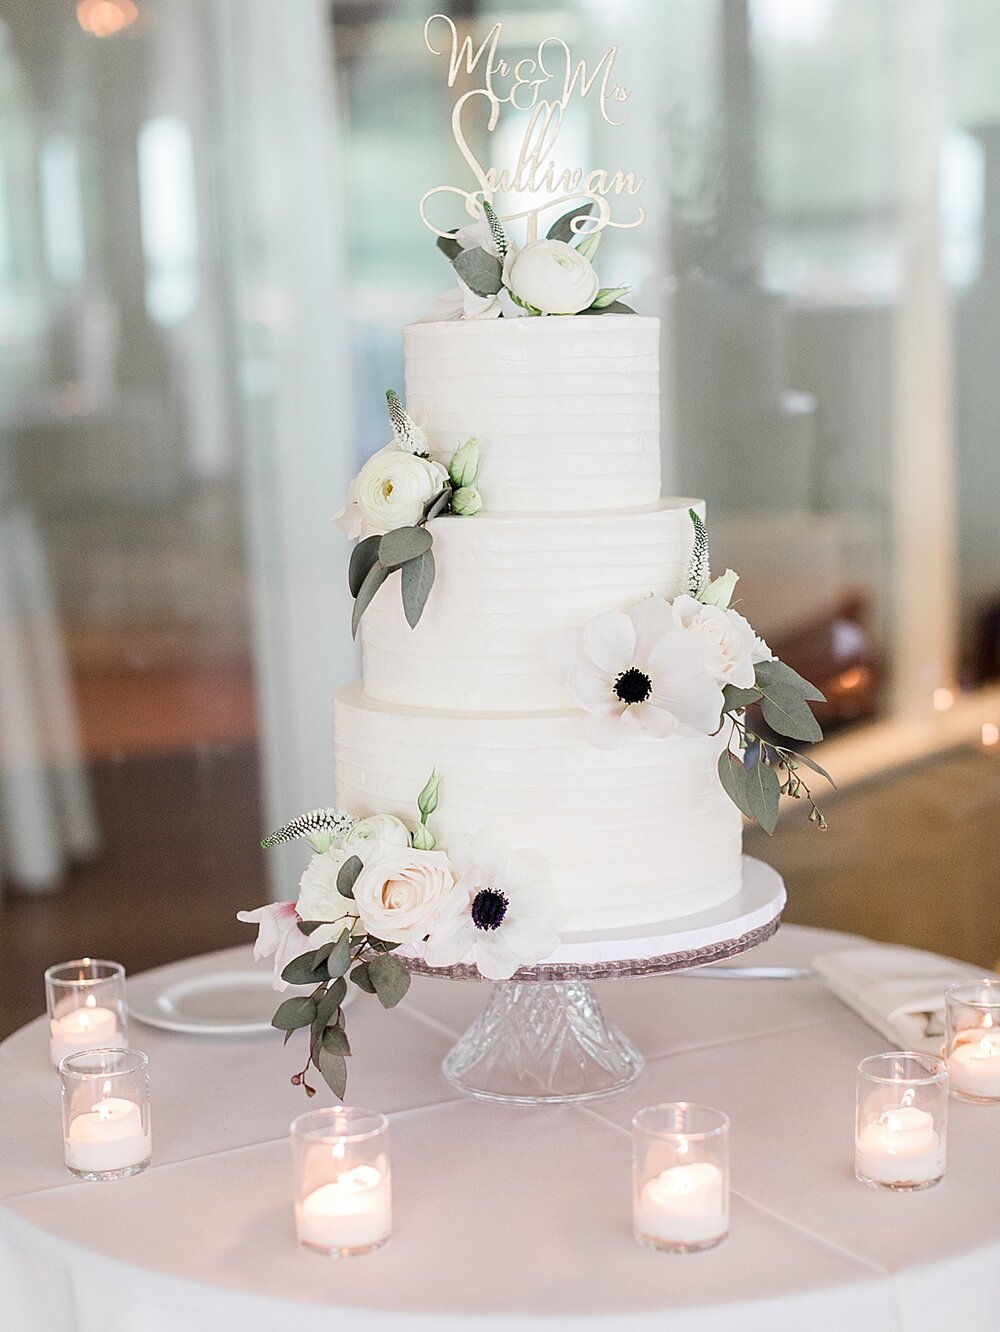 tiered wedding cake at Battery Garden | Tri-State area wedding venues photographed by Asher Gardner Photography